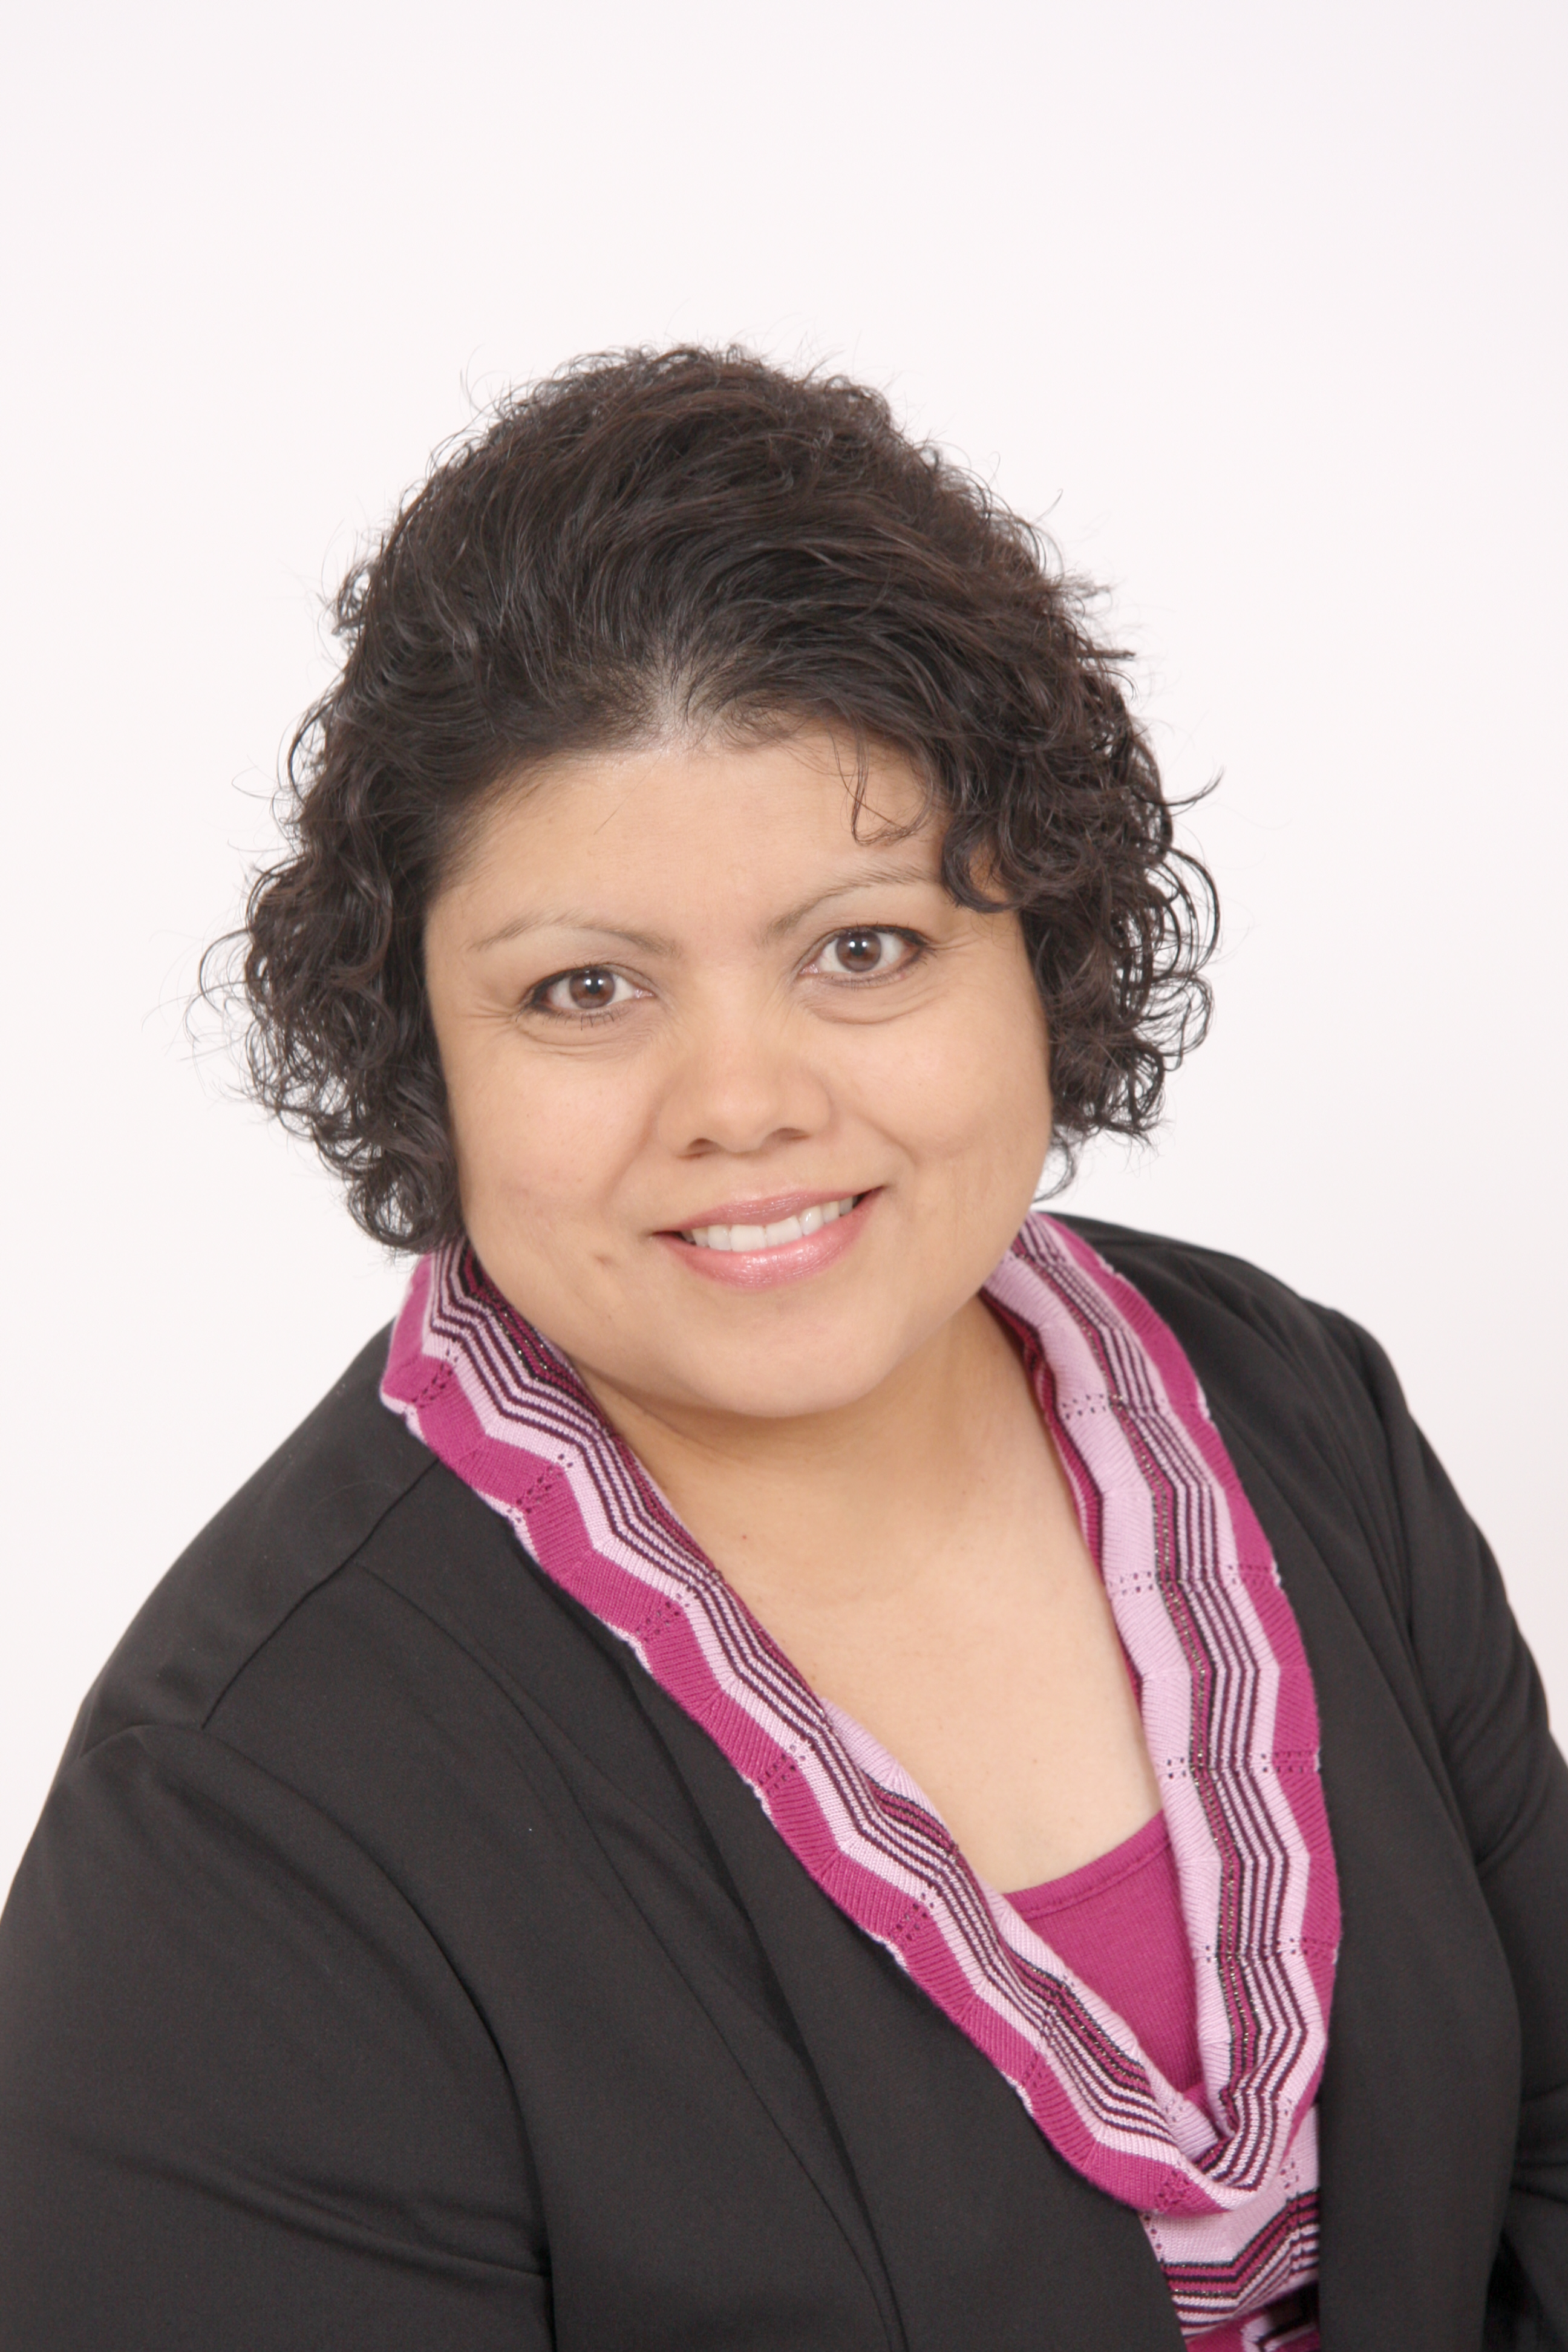 Meet EXIT’s Newest Agent, Renee Carillo!